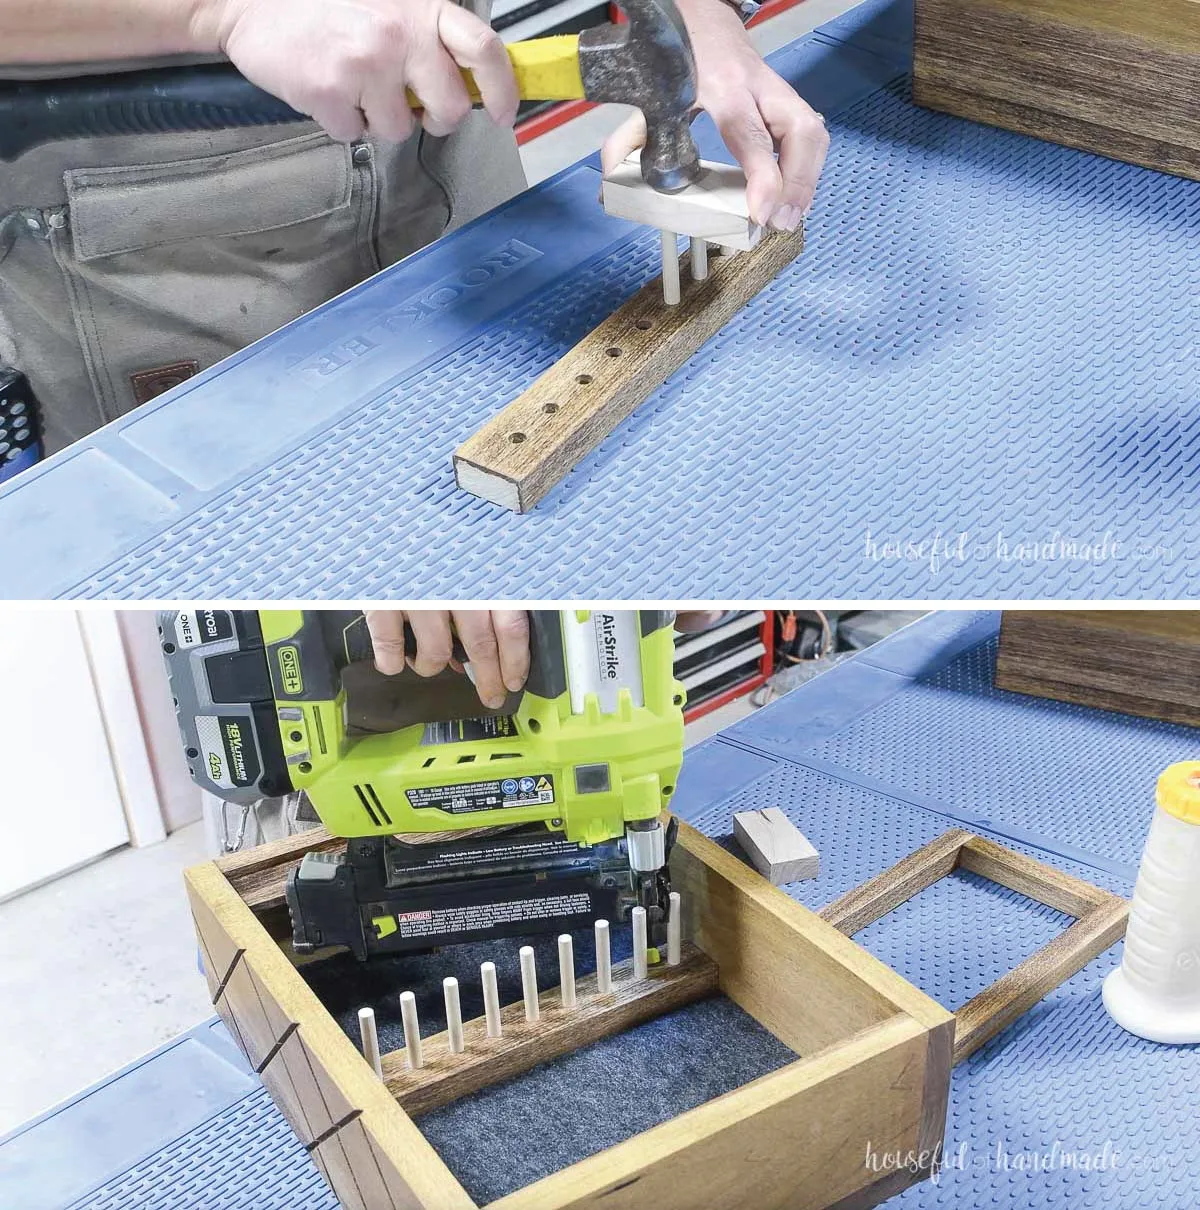 Hammering pegs into a 1x2 for bracelets and securing it inside the jewelry box with brad nails. 